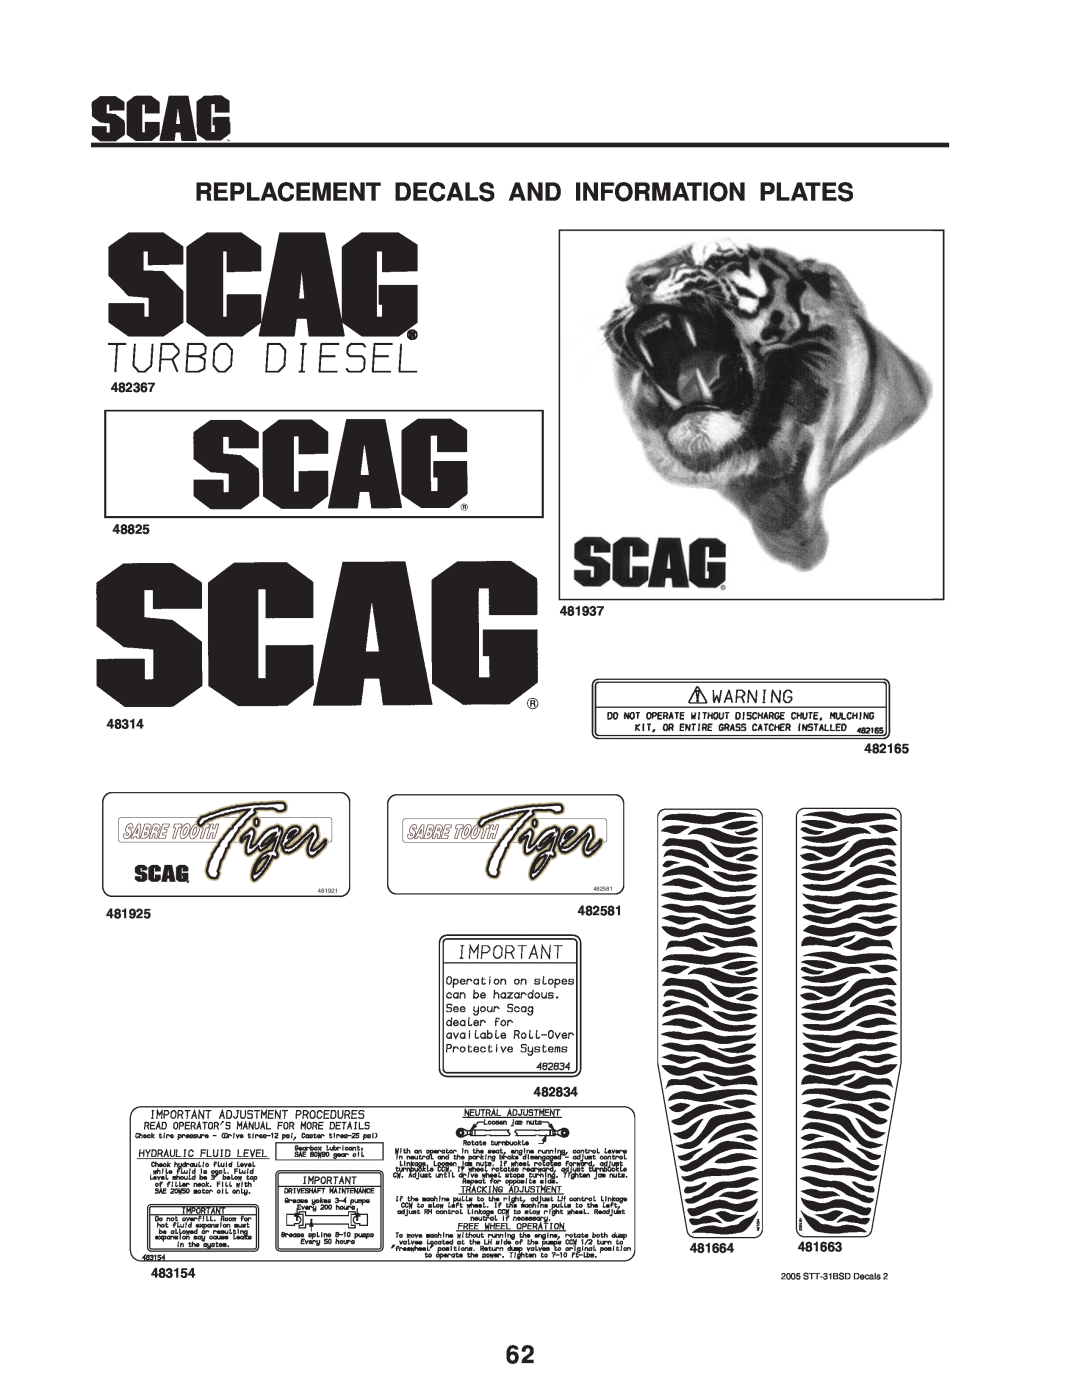 Scag Power Equipment STT-31BSD Replacement Decals And Information Plates, 482367 48825 481937, 482581, 482834, 482165 